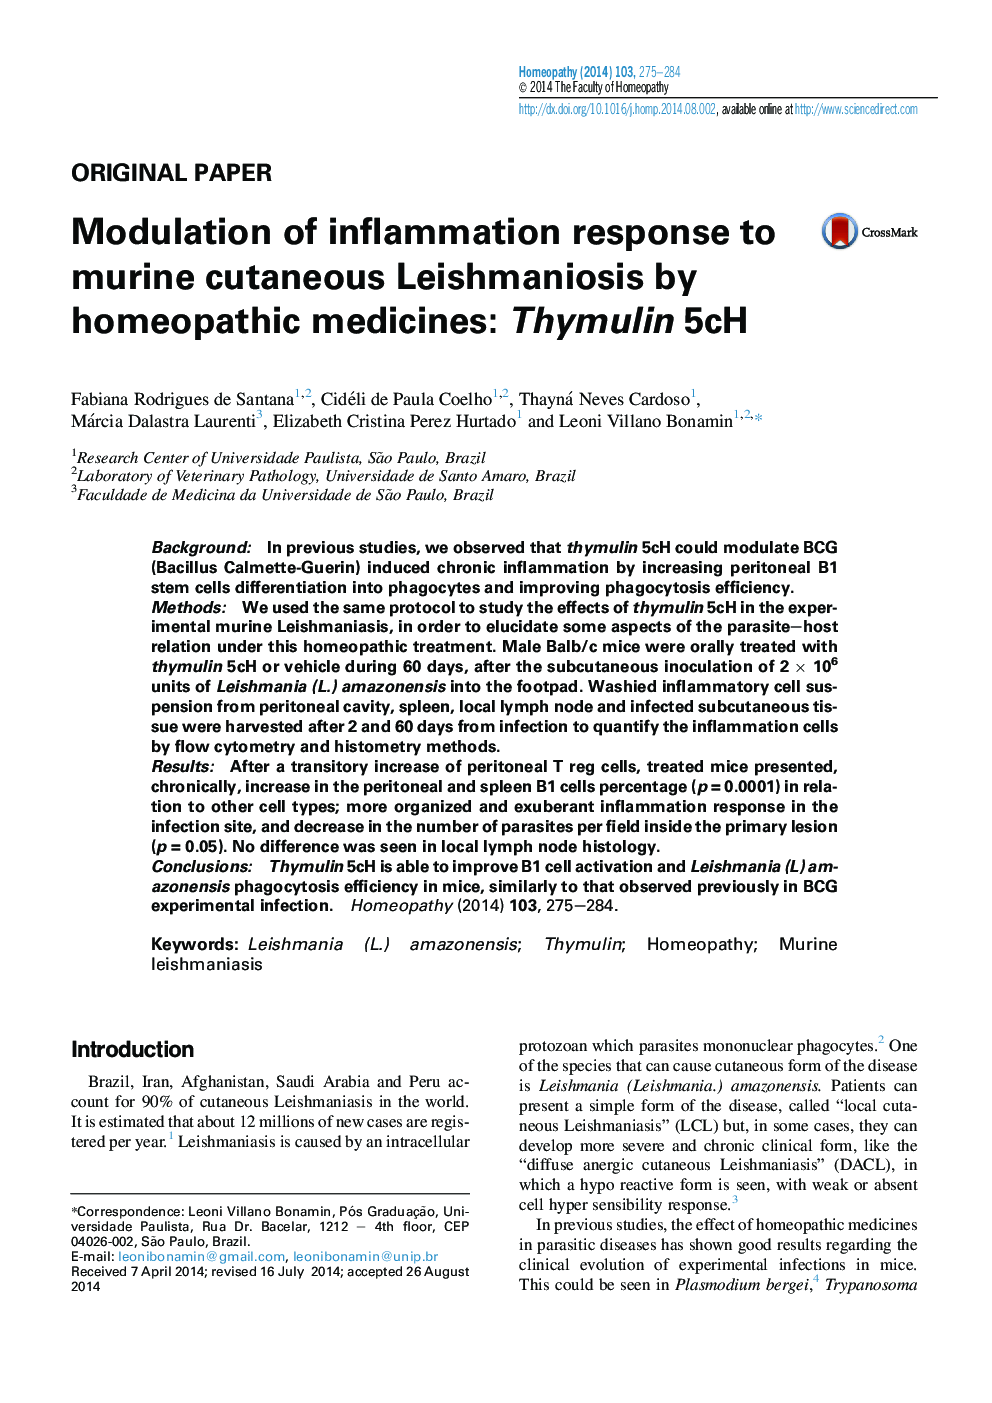 Original paperModulation of inflammation response to murine cutaneous Leishmaniosis by homeopathic medicines: Thymulin 5cH